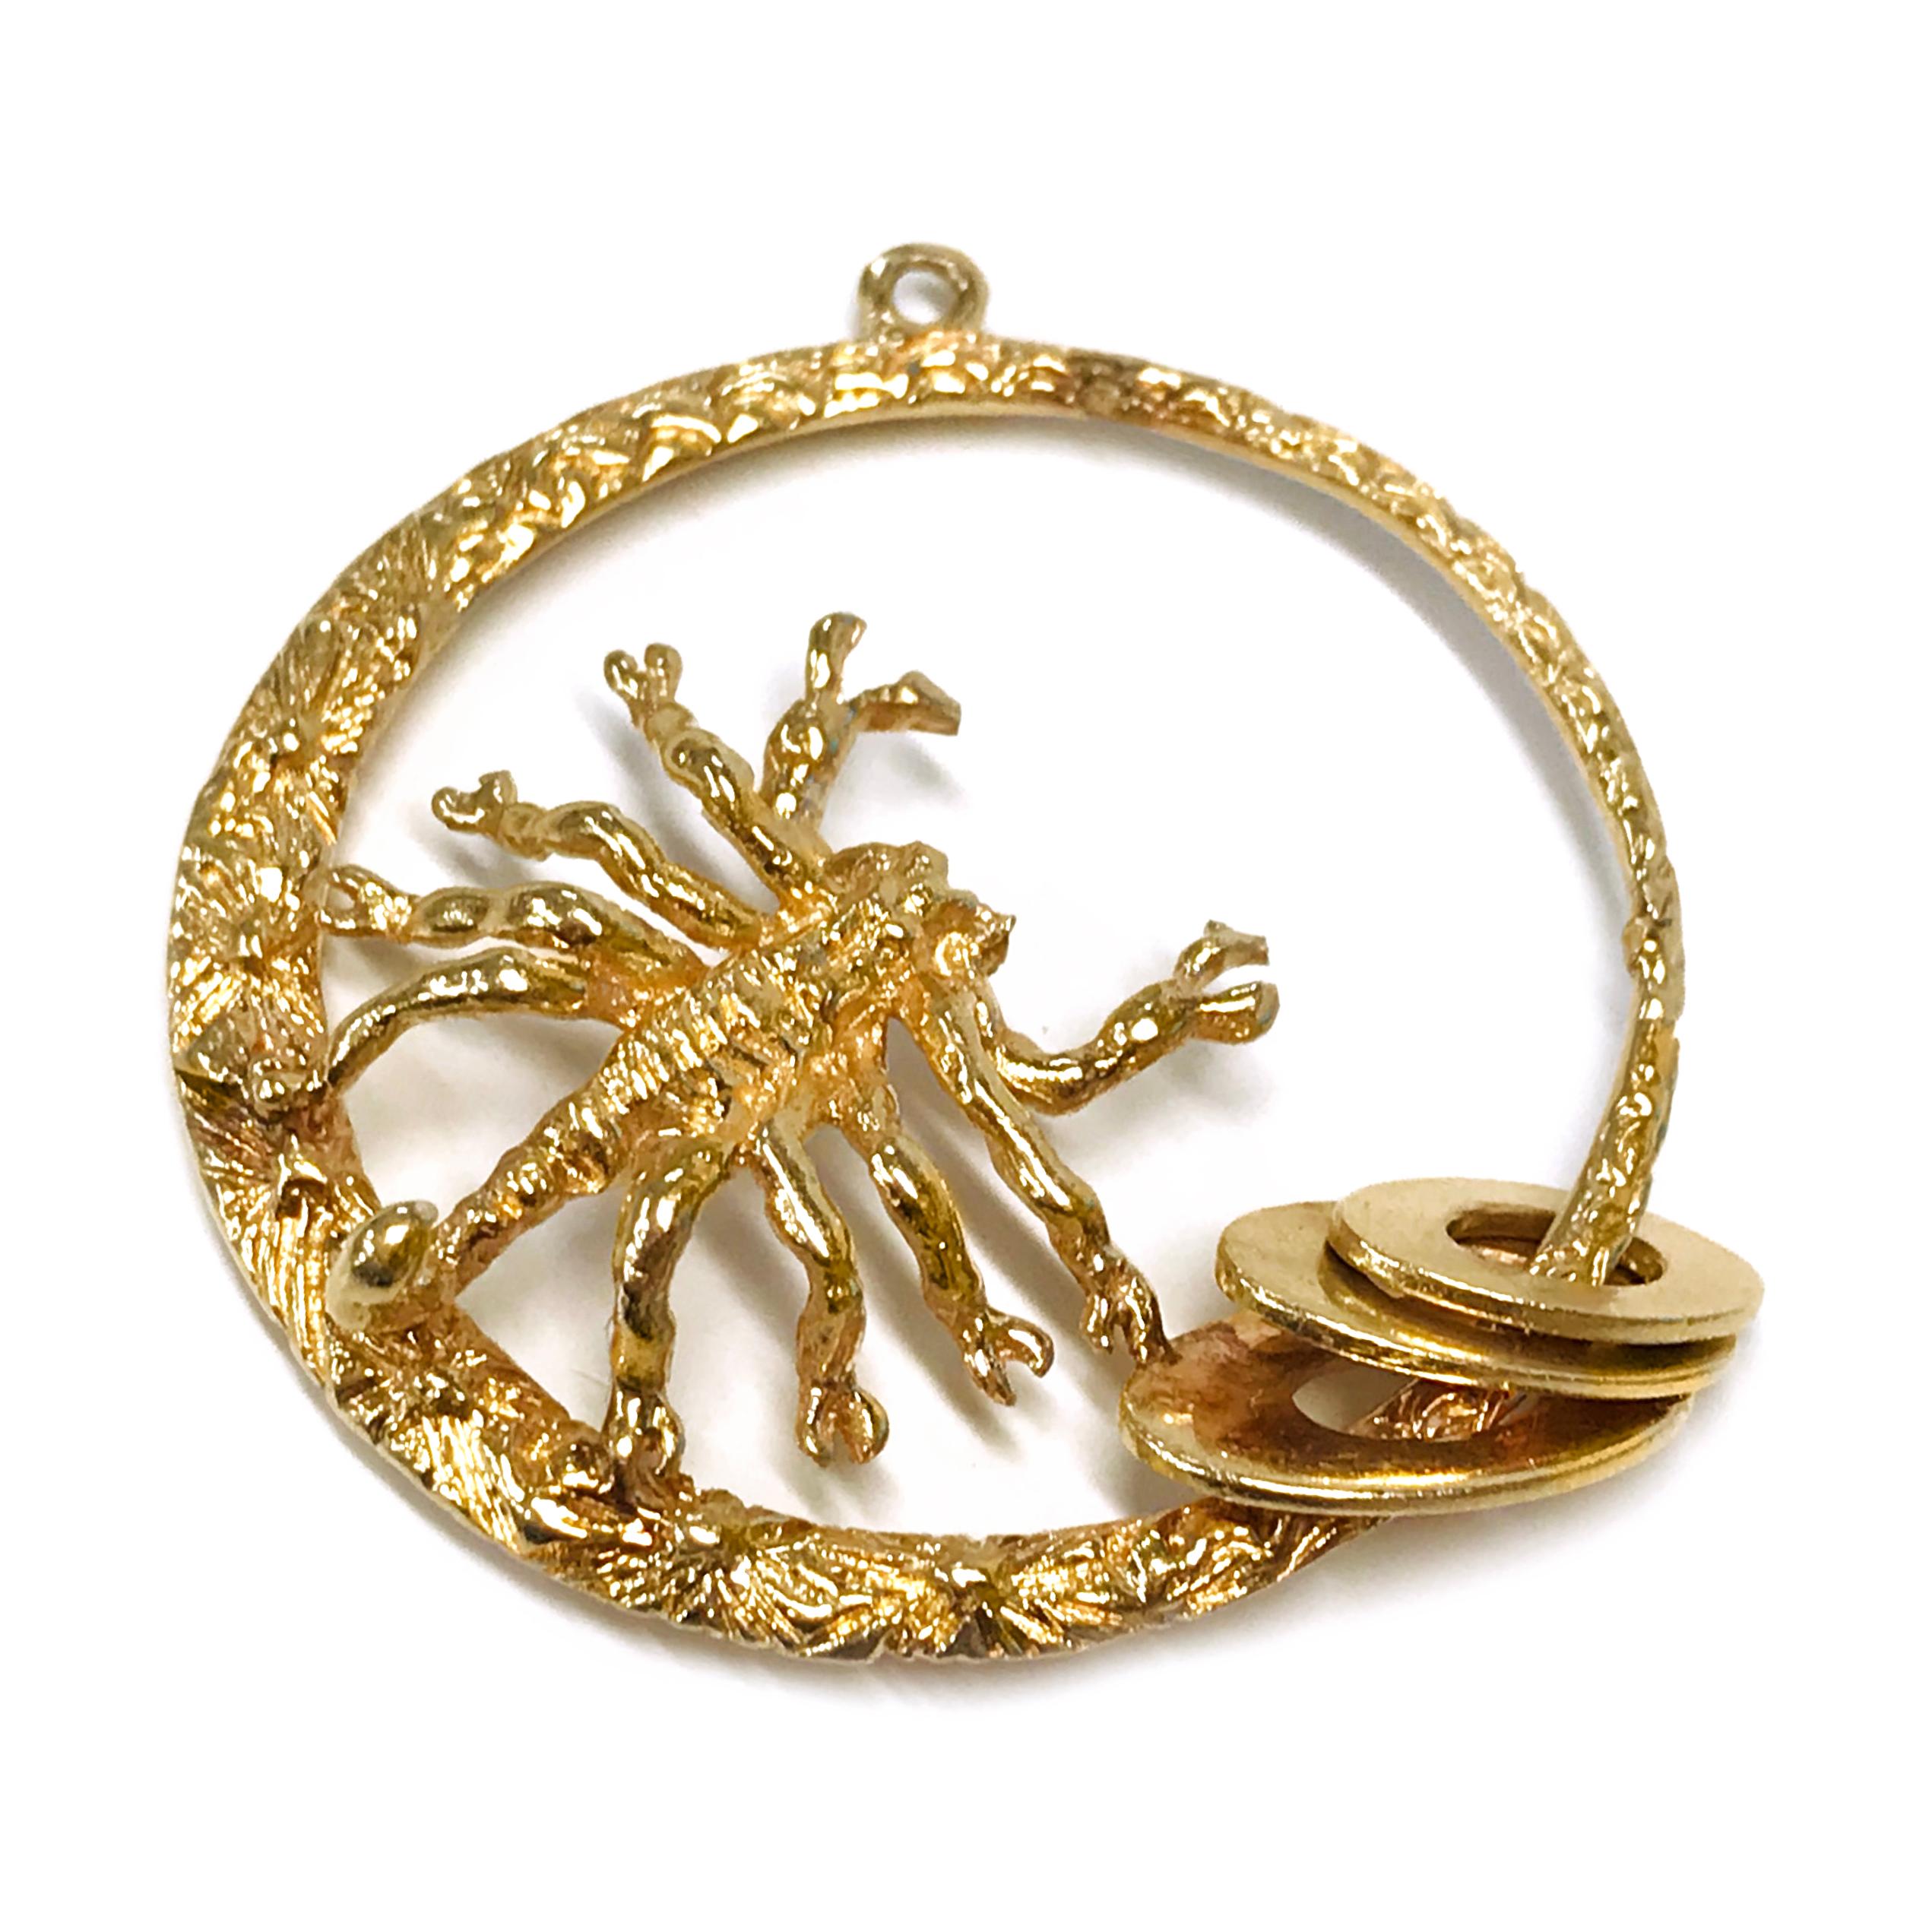 14 Karat Scorpion Pendant. The pendant measures 37.35mm in diameter. The pendant features a thin to wide circle with a scorpion that is facing the center of the pendant with three smooth oval discs near the bottom. The pendant circle is highly